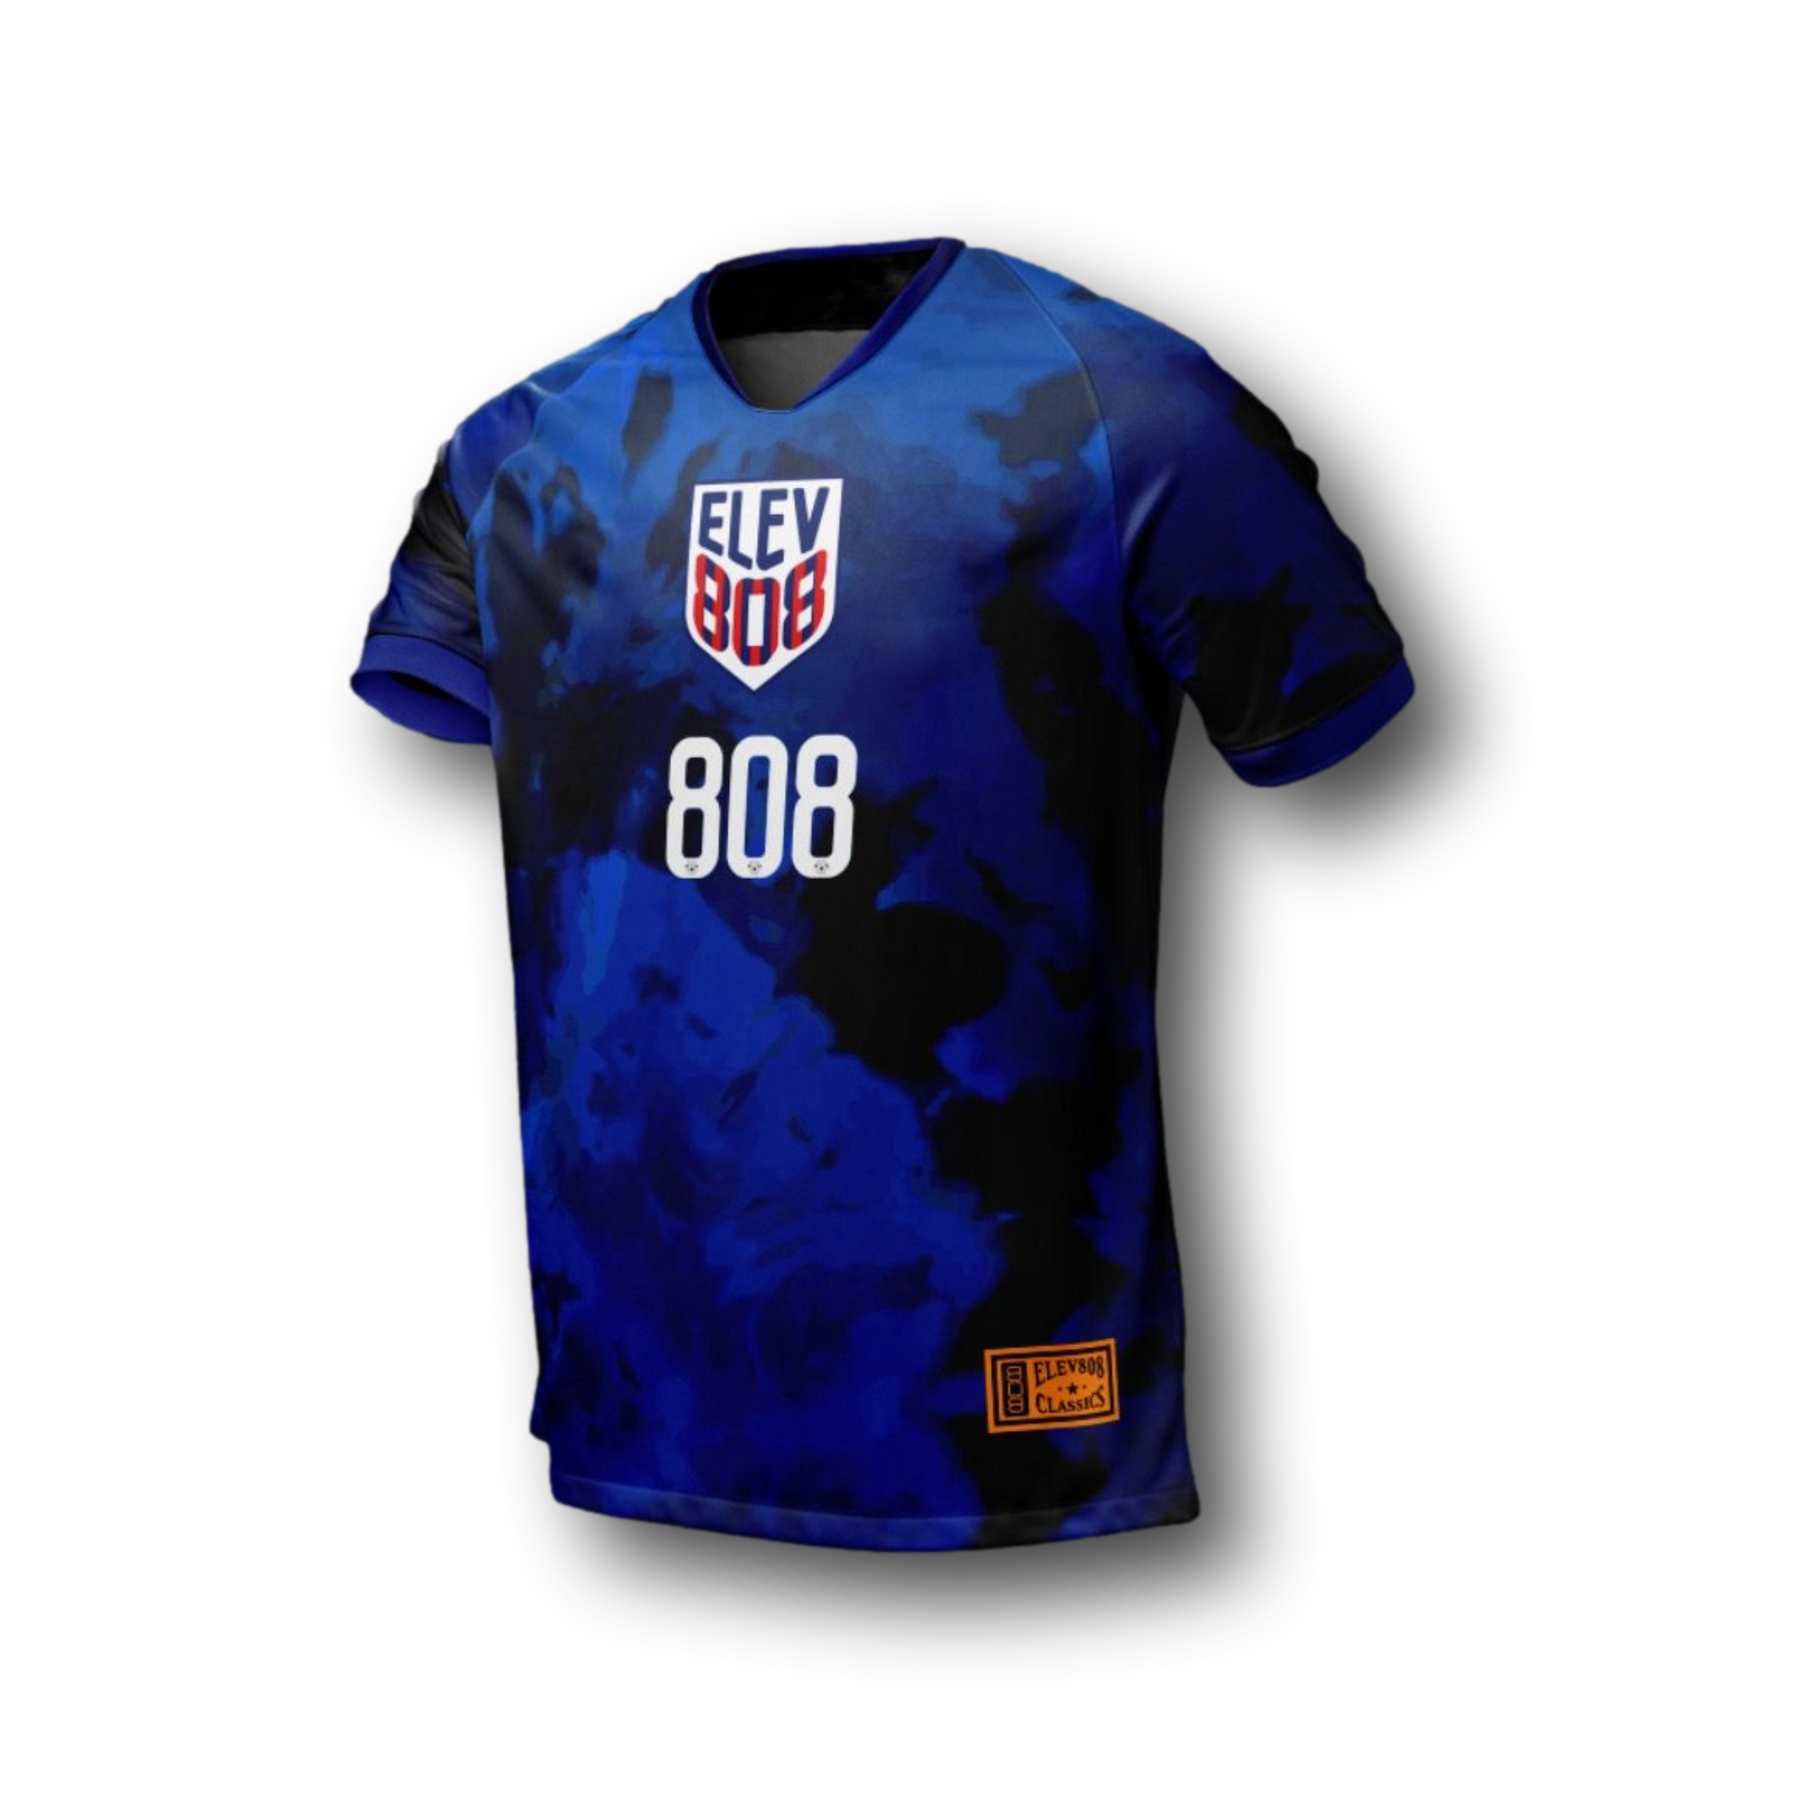 USA 808 Blue and Black Soccer Jersey